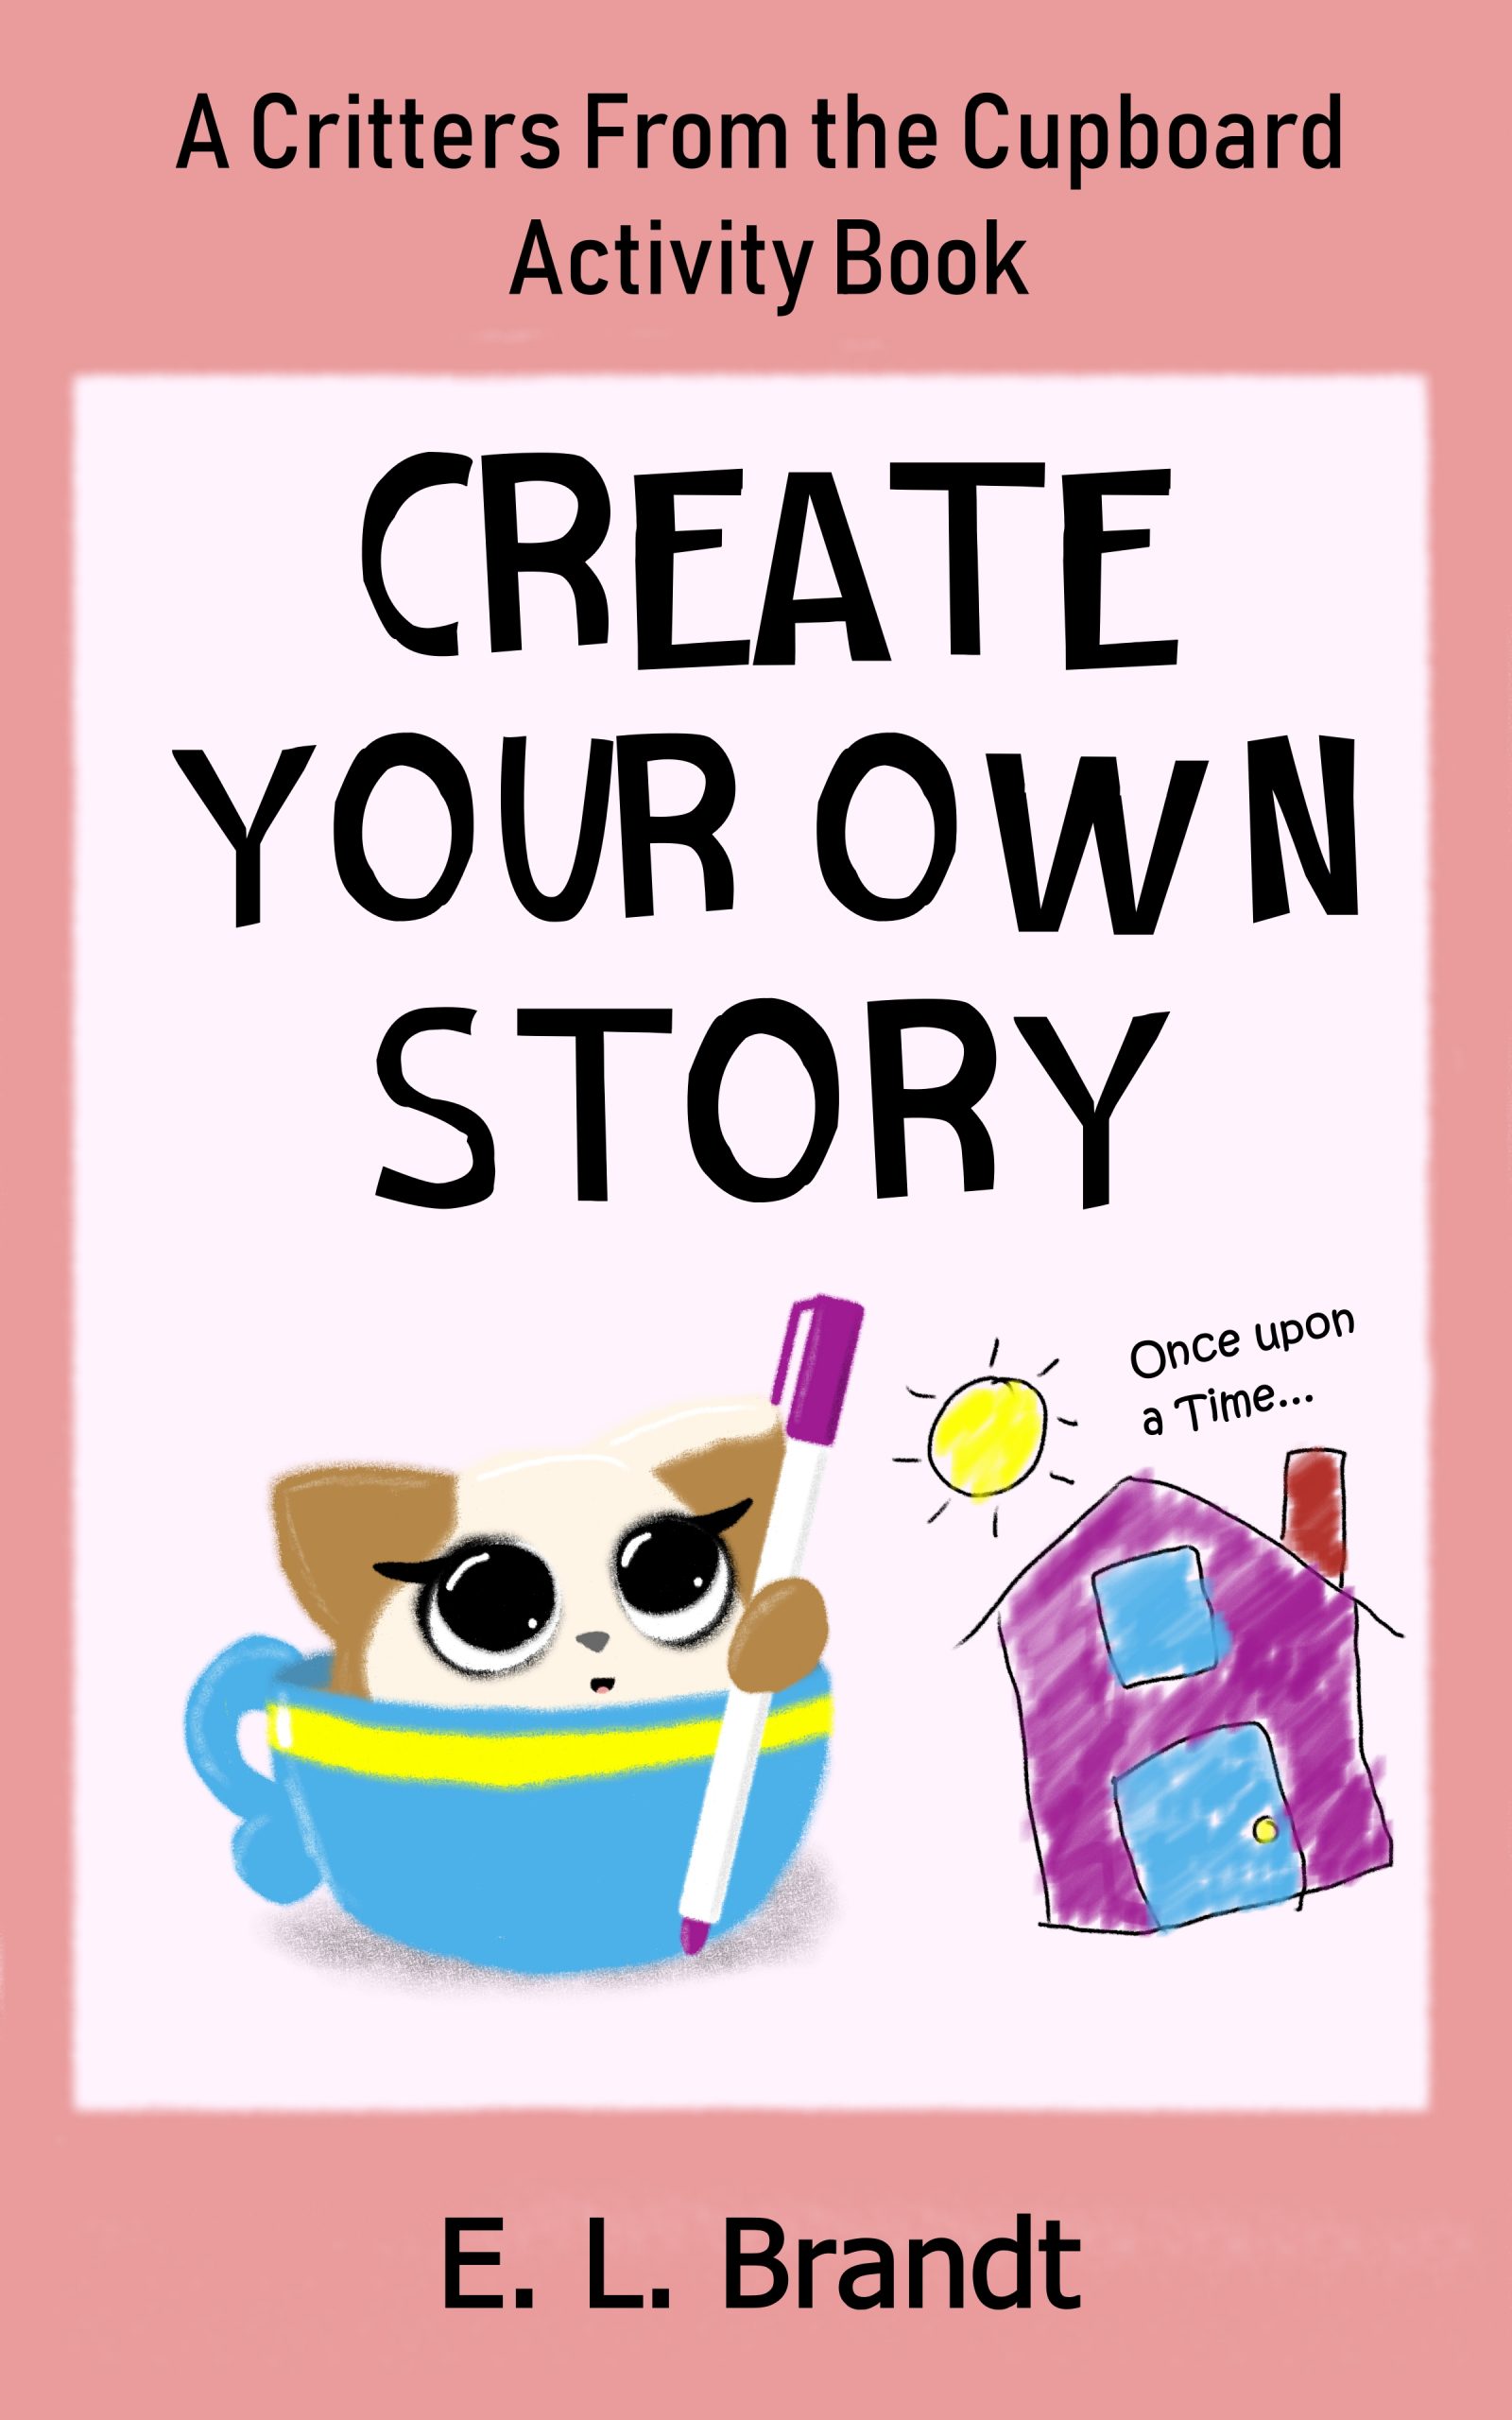 Creat your own Story - pink